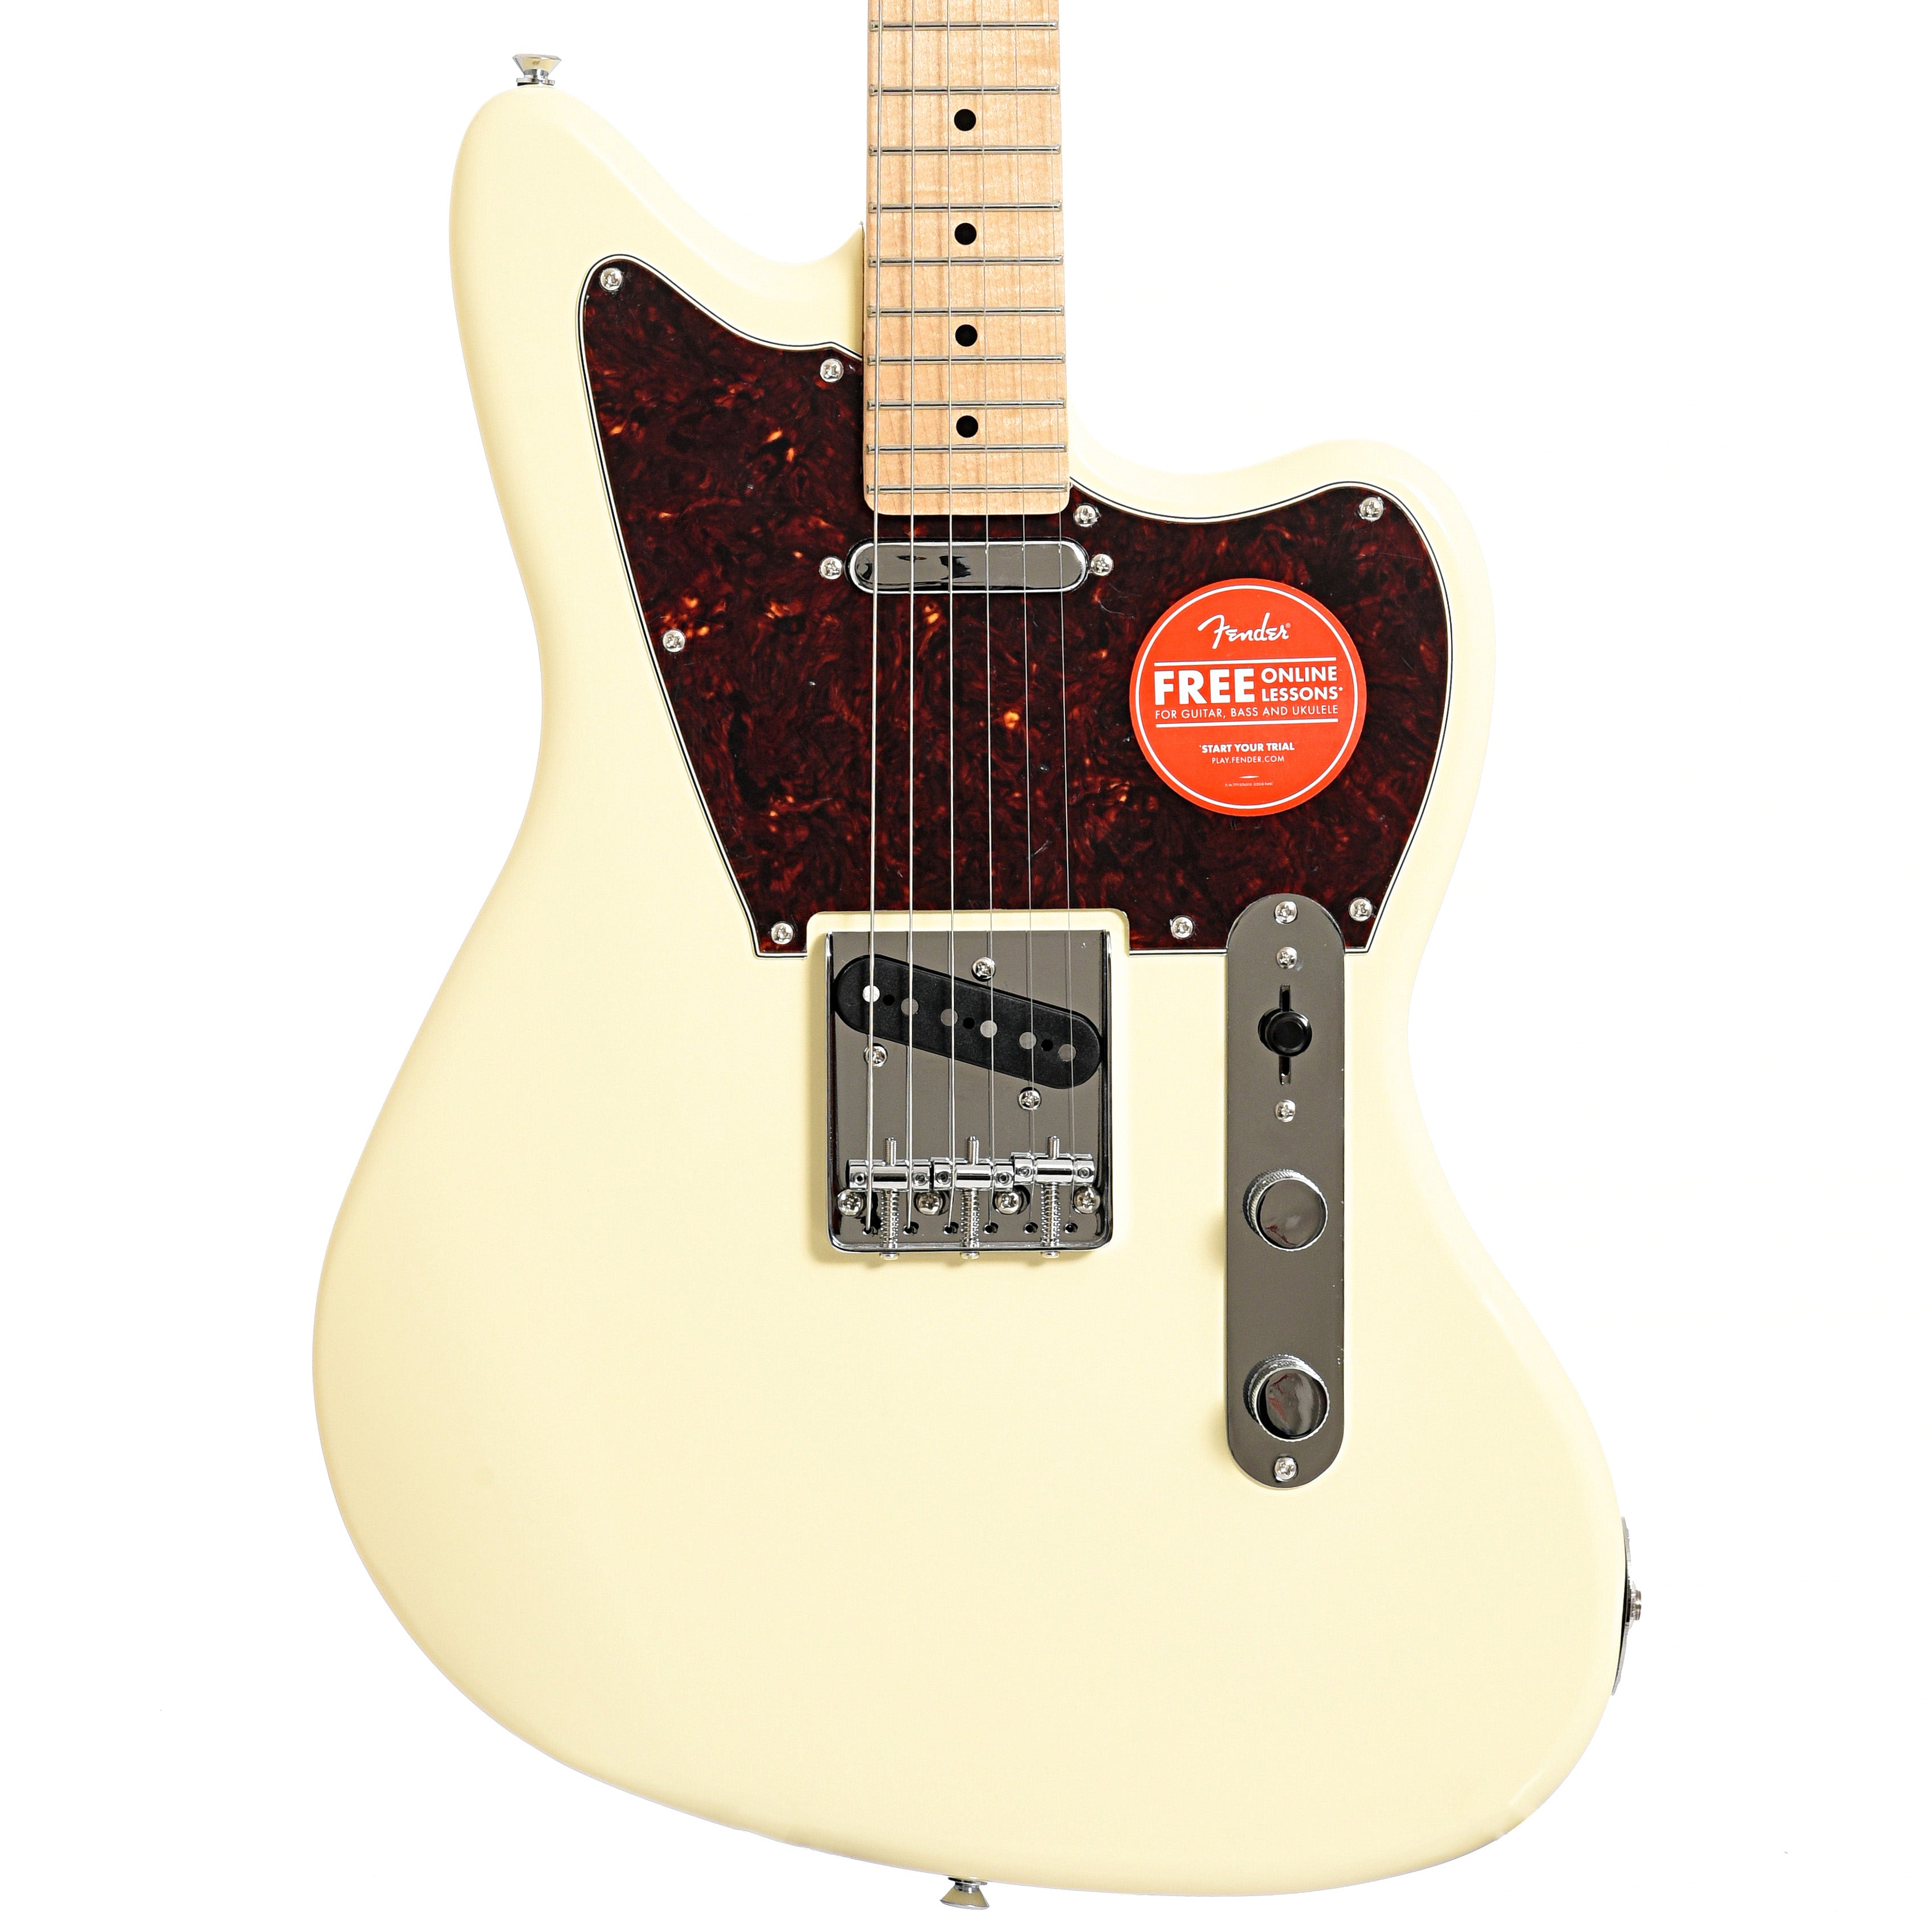 Squier Paranormal Offset Telecaster, Olympic White